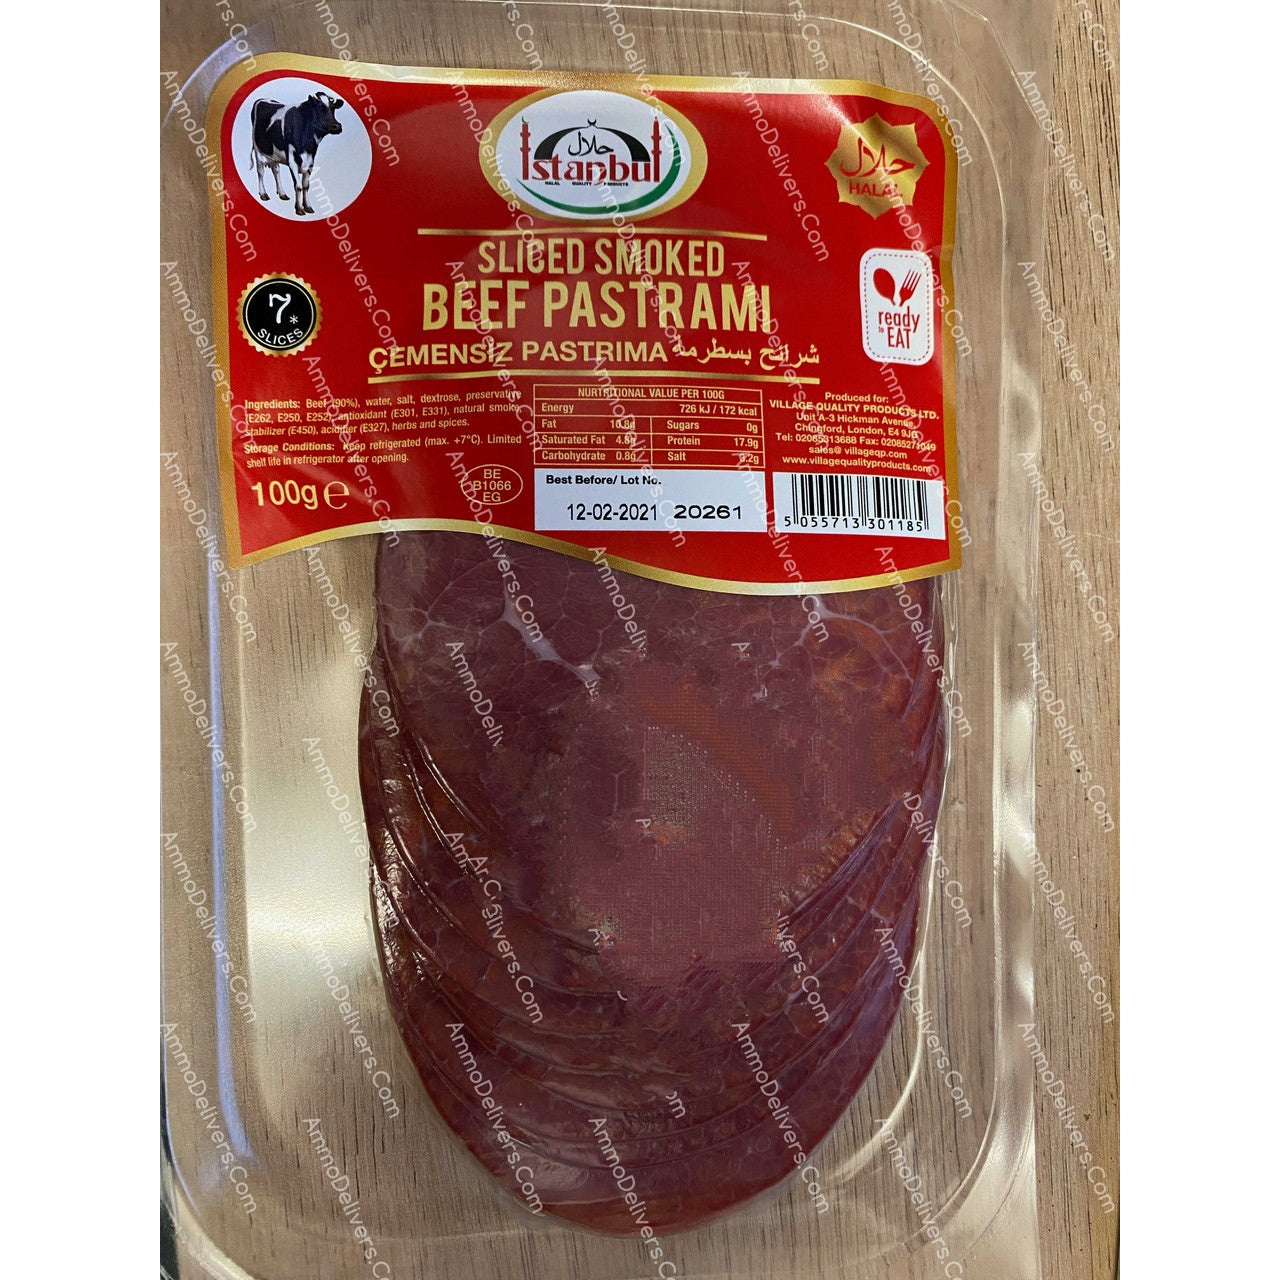 Istanbul sliced smoked beef pastrami 100g